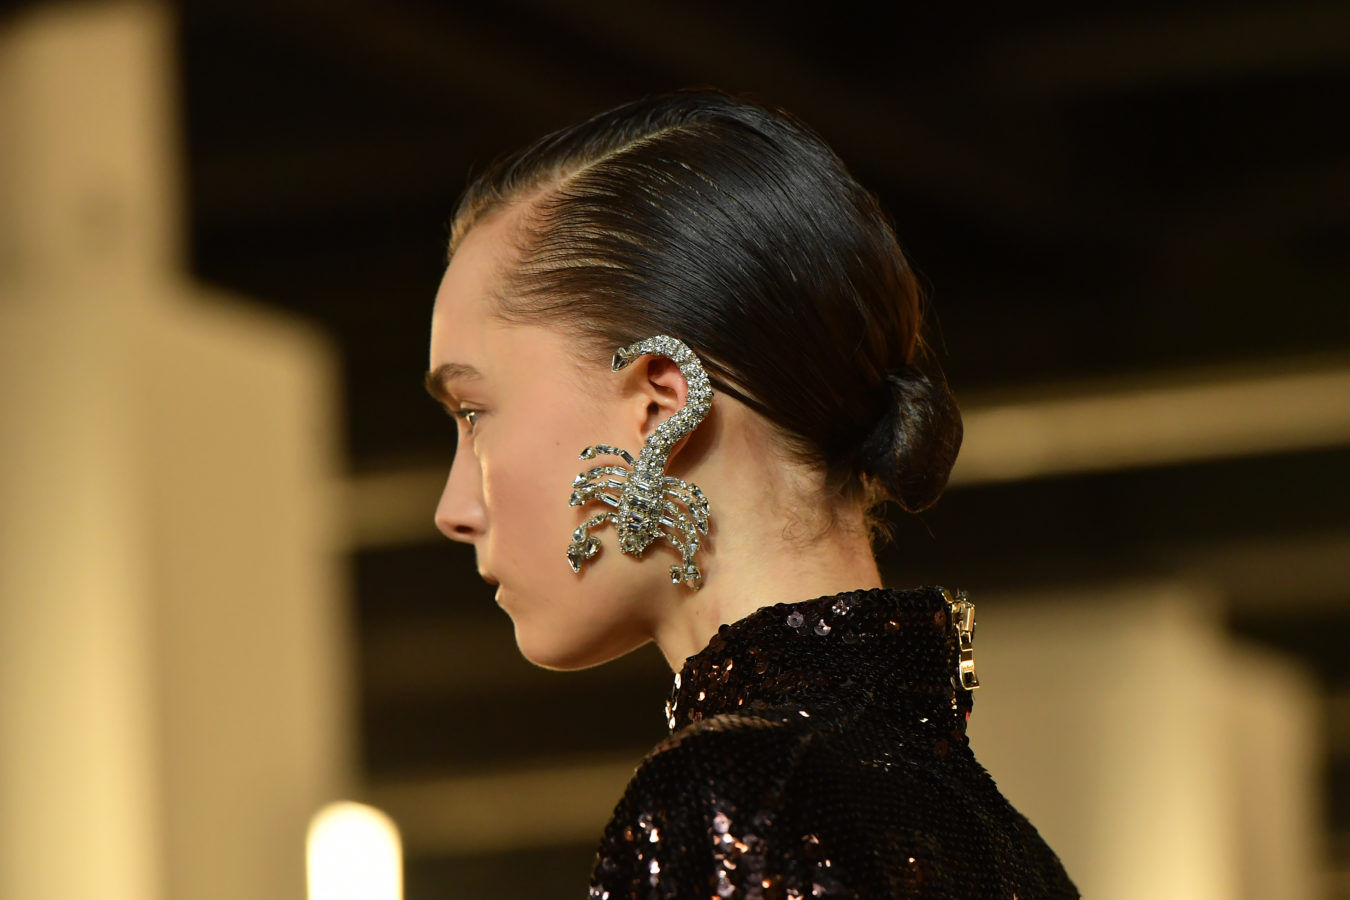 Jewellery trends for fall that you need to take note of